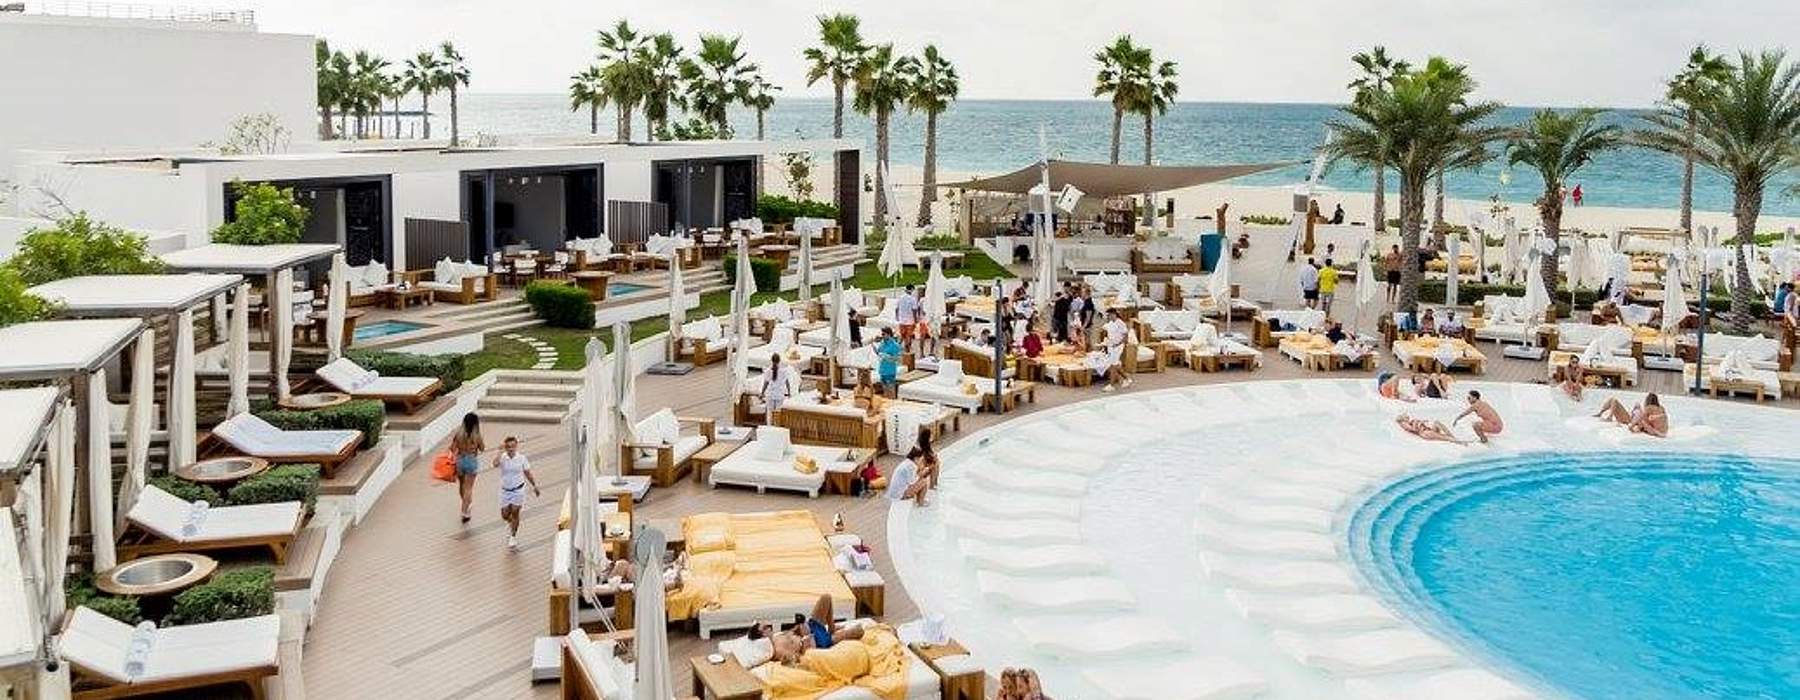 5 Best Beach Clubs in Dubai for a Crazy Time with Your Group